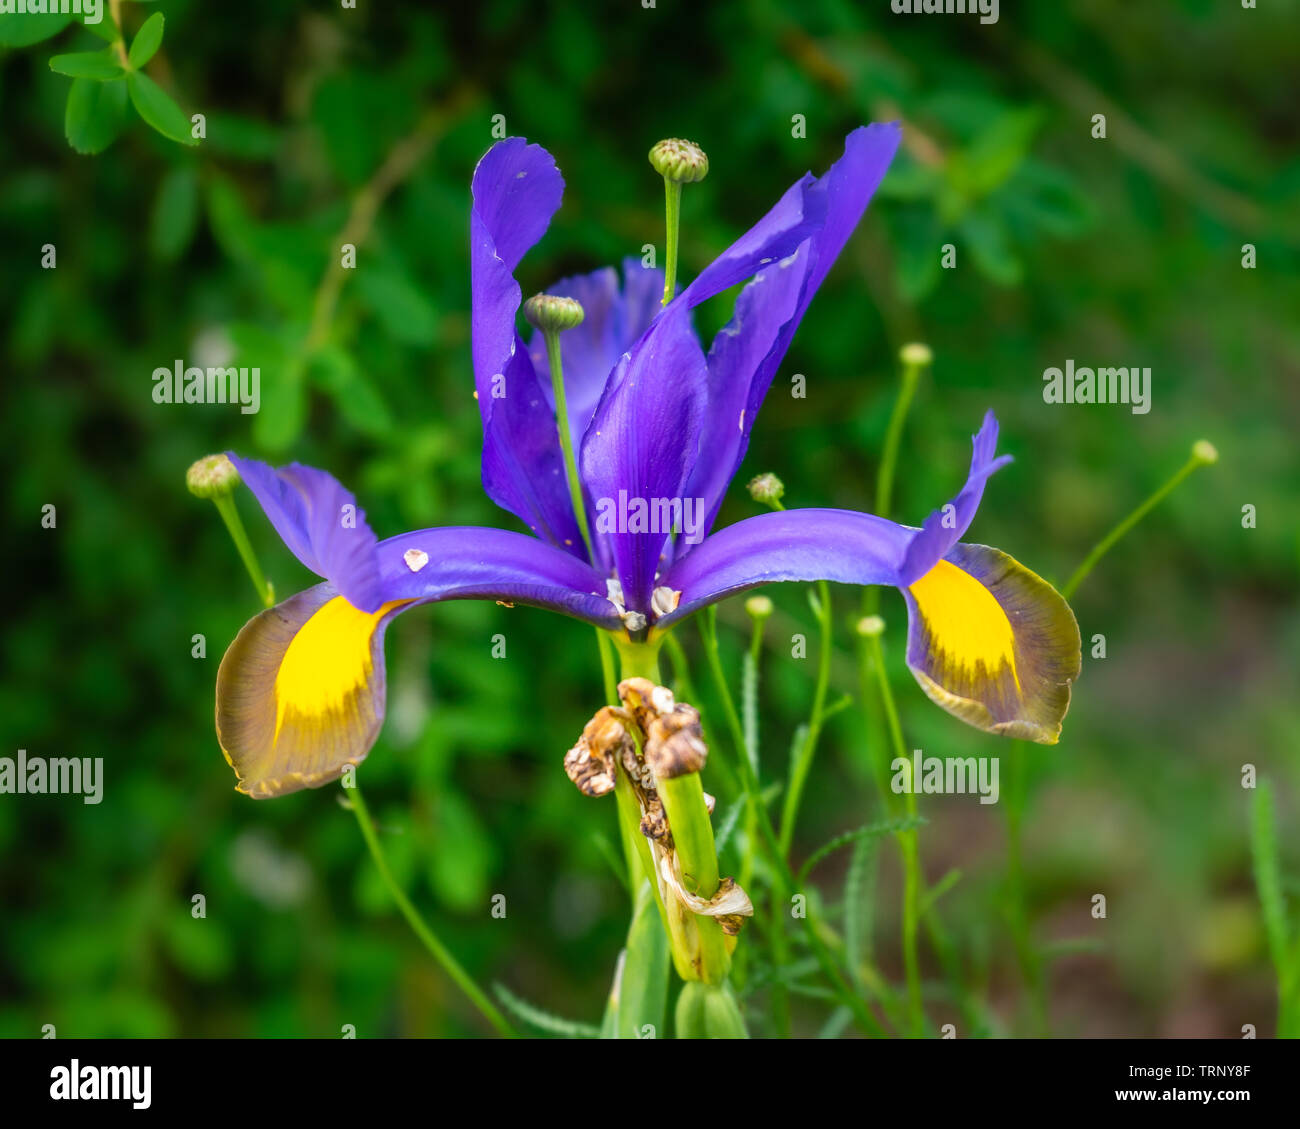 Close up of  the blue to violet flower petals of an Iris xiphium plant or more commonly known as Spanish Iris during June in Southern England, UK Stock Photo